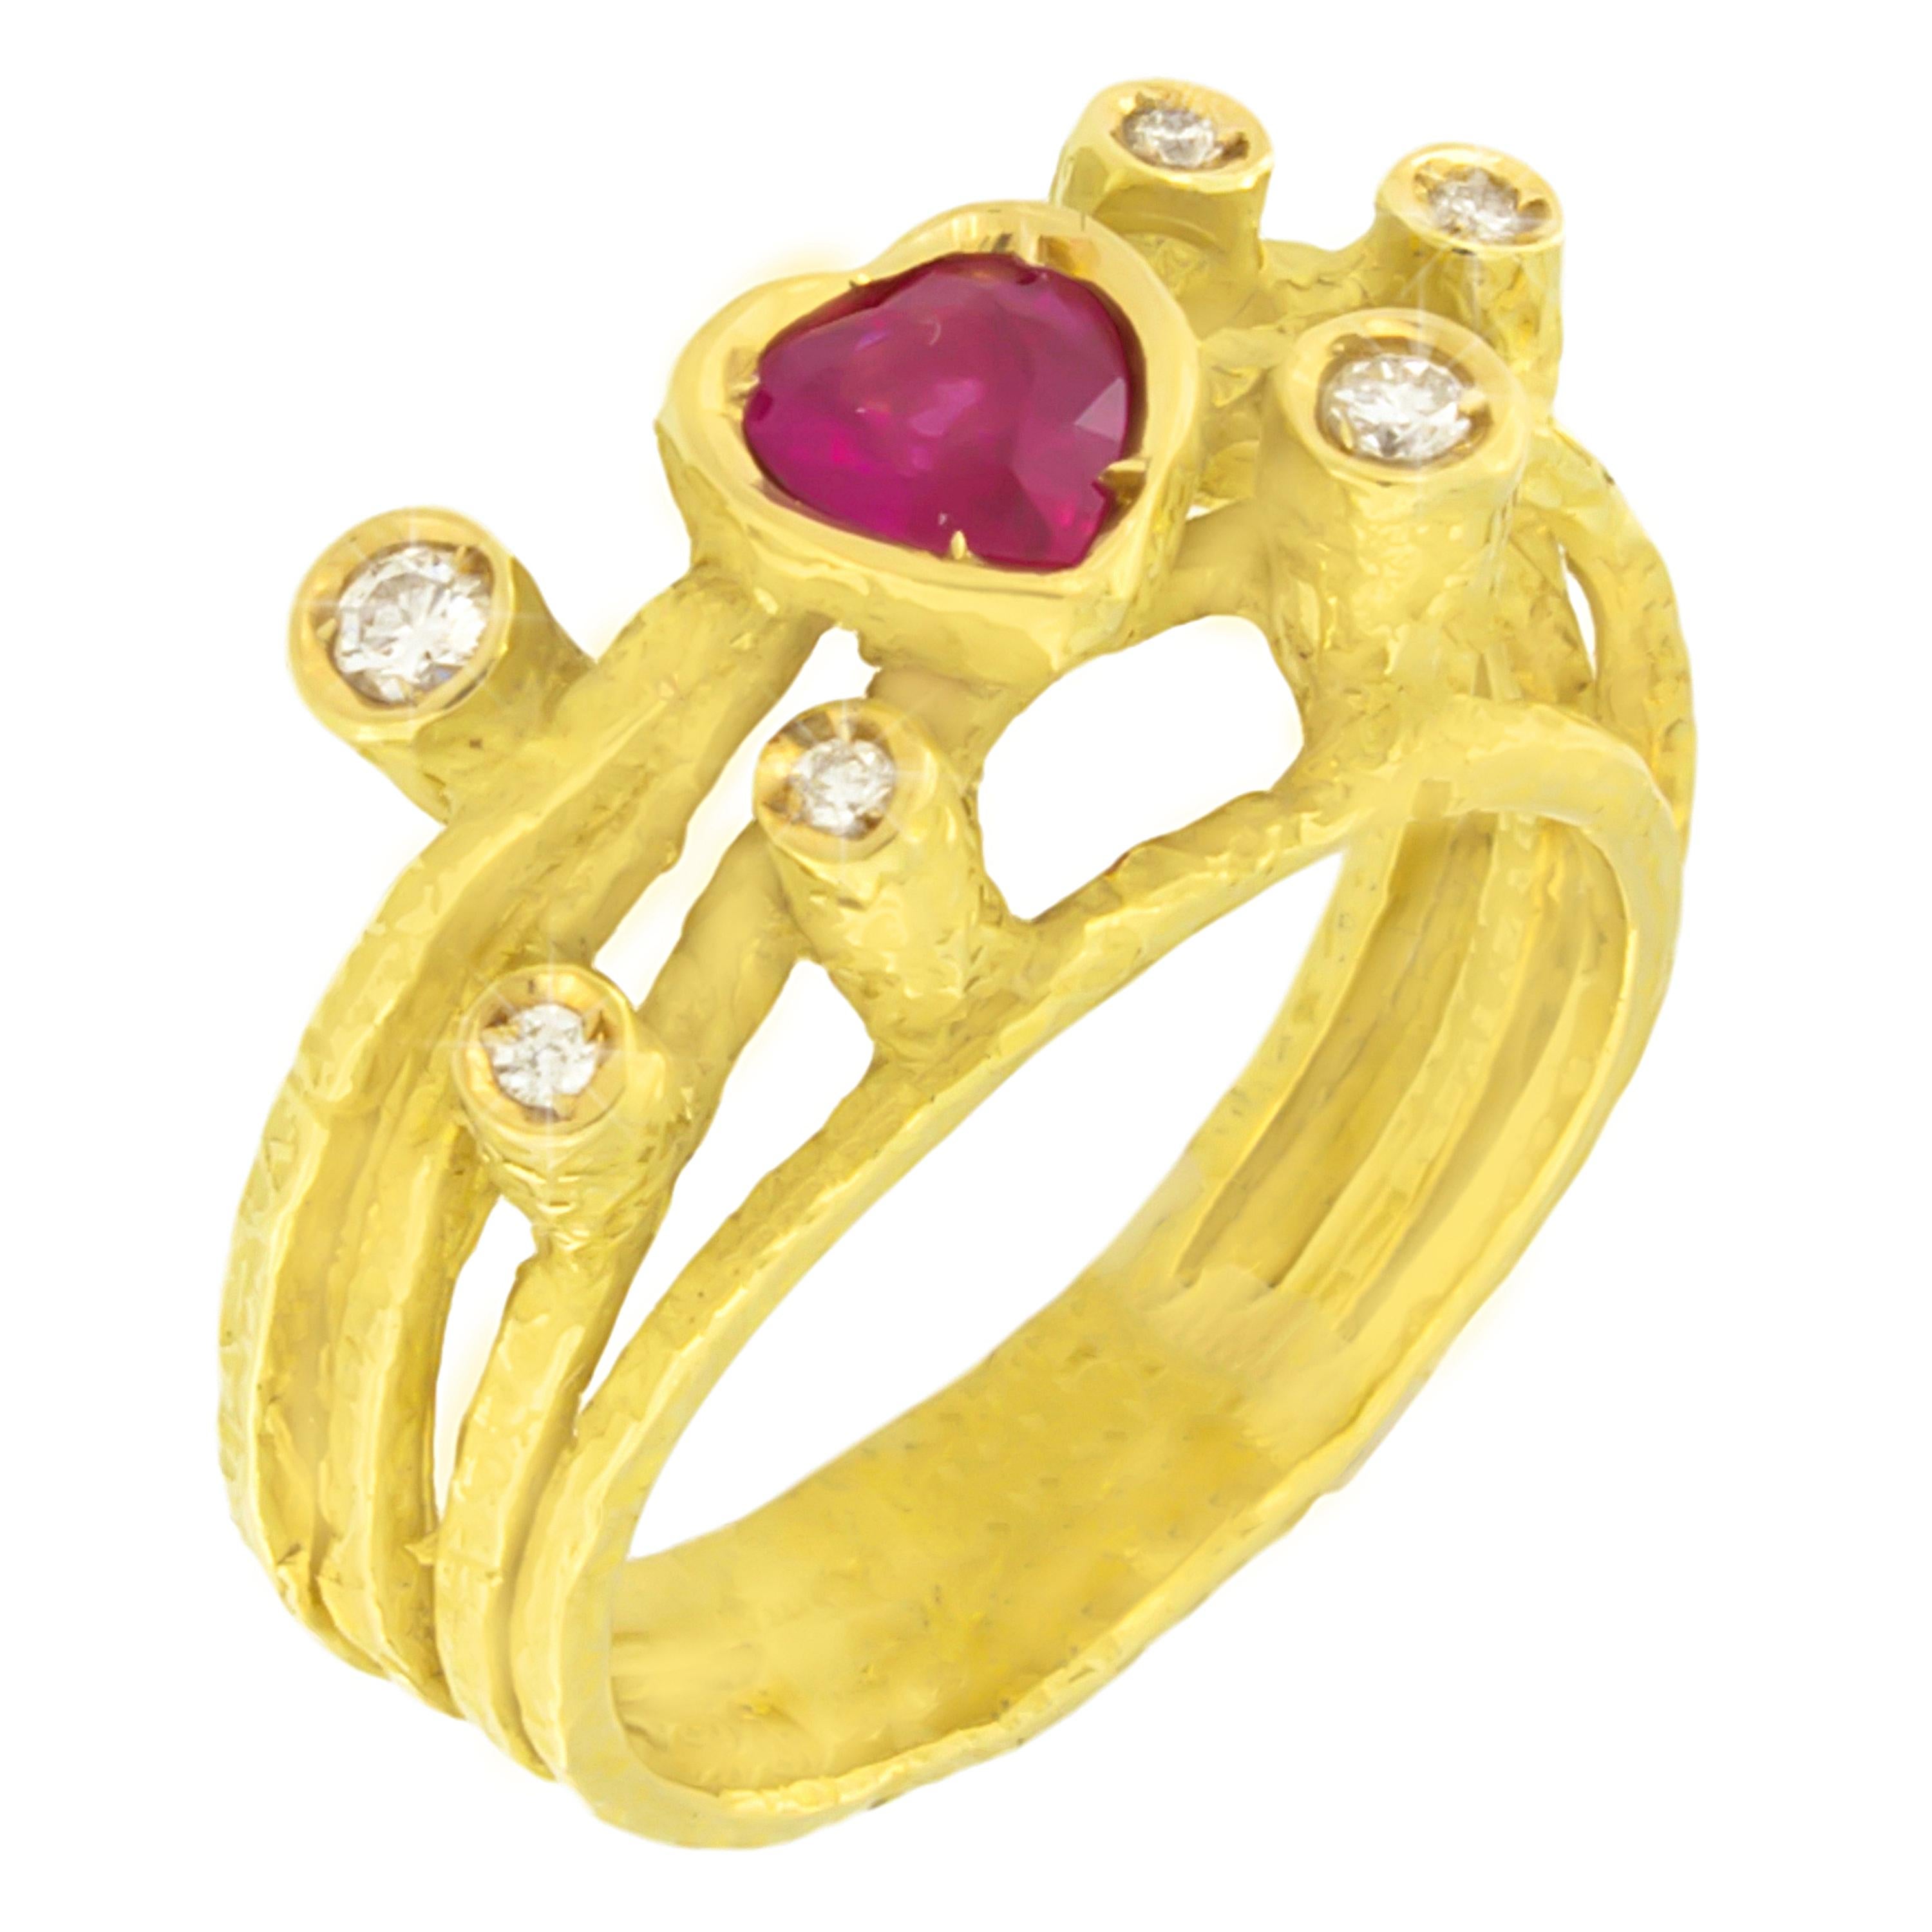 Lovely Heart Ruby and Diamonds Satin Yellow Gold Cocktail Ring, from Sacchi’s Universe Collection, hand-crafted with lost-wax casting technique.

Lost-wax casting, one of the oldest techniques for creating jewelry, forms the basis of Sacchi's